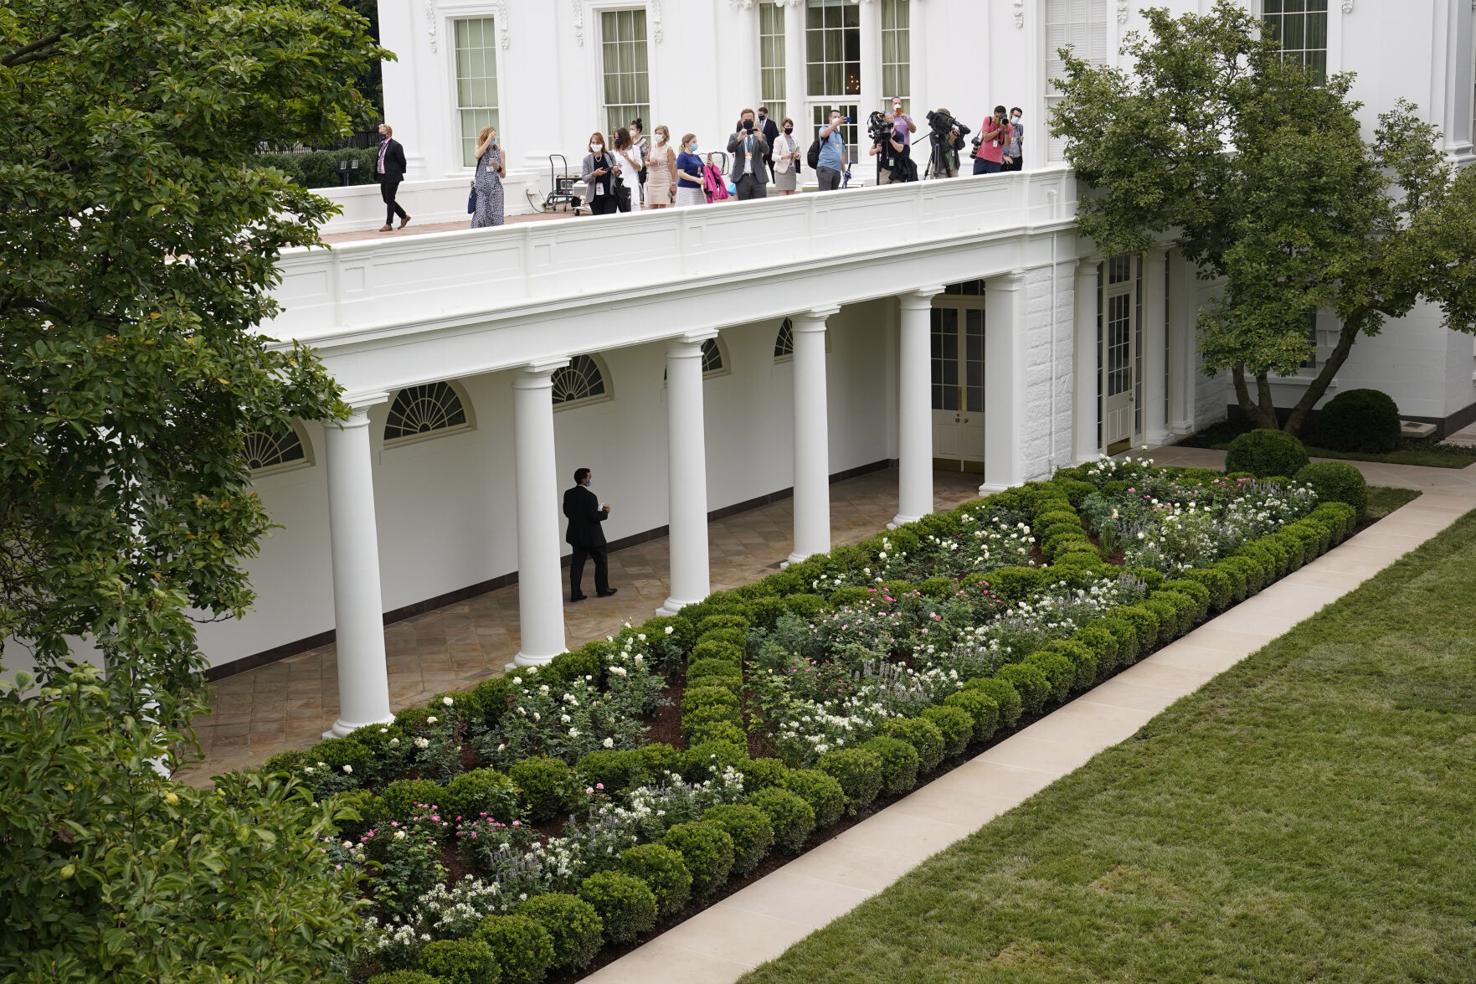 Photos An upclose look at the newly renovated White House Rose Garden